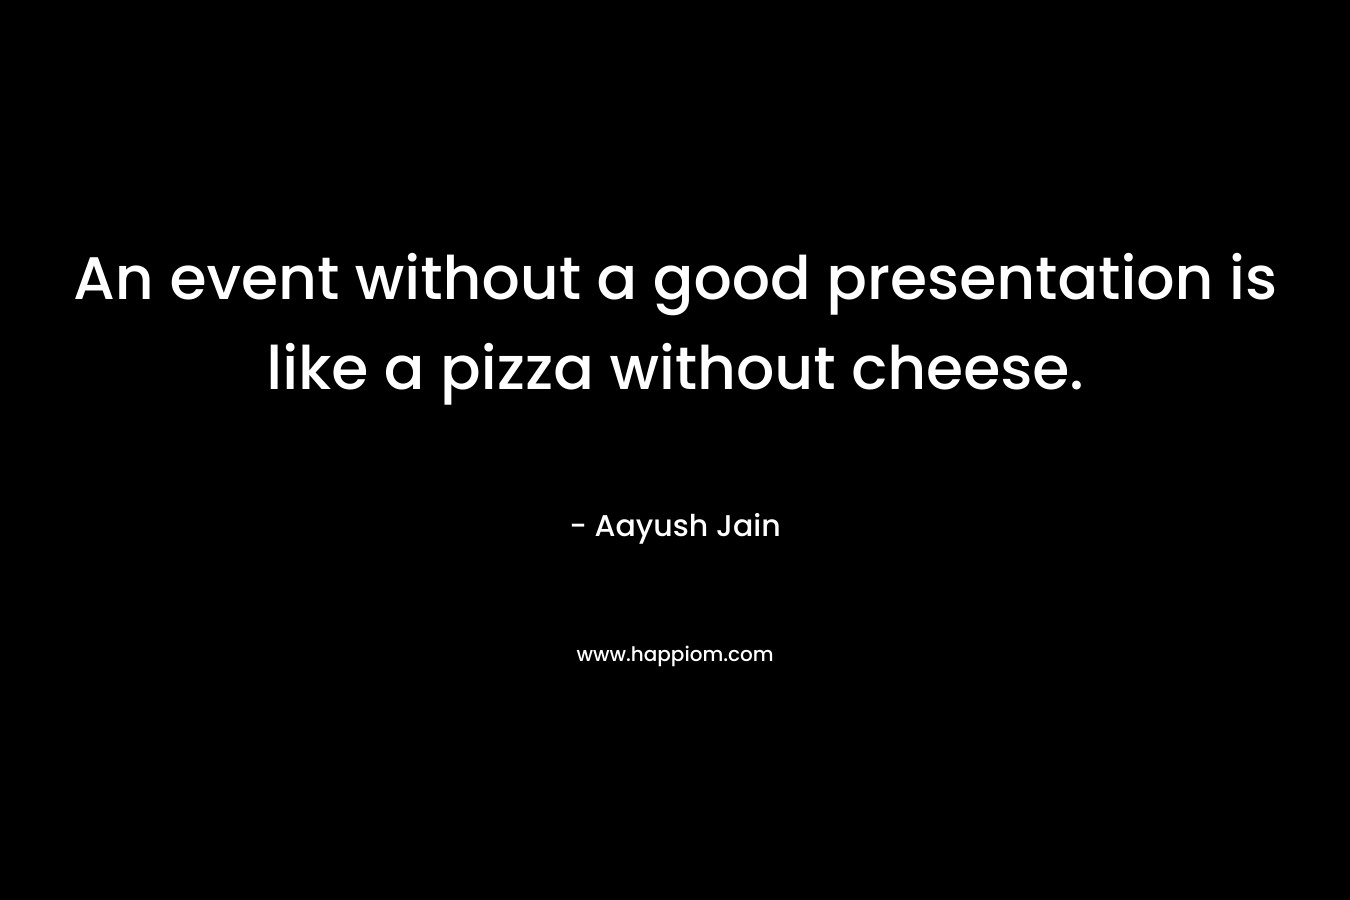 An event without a good presentation is like a pizza without cheese.